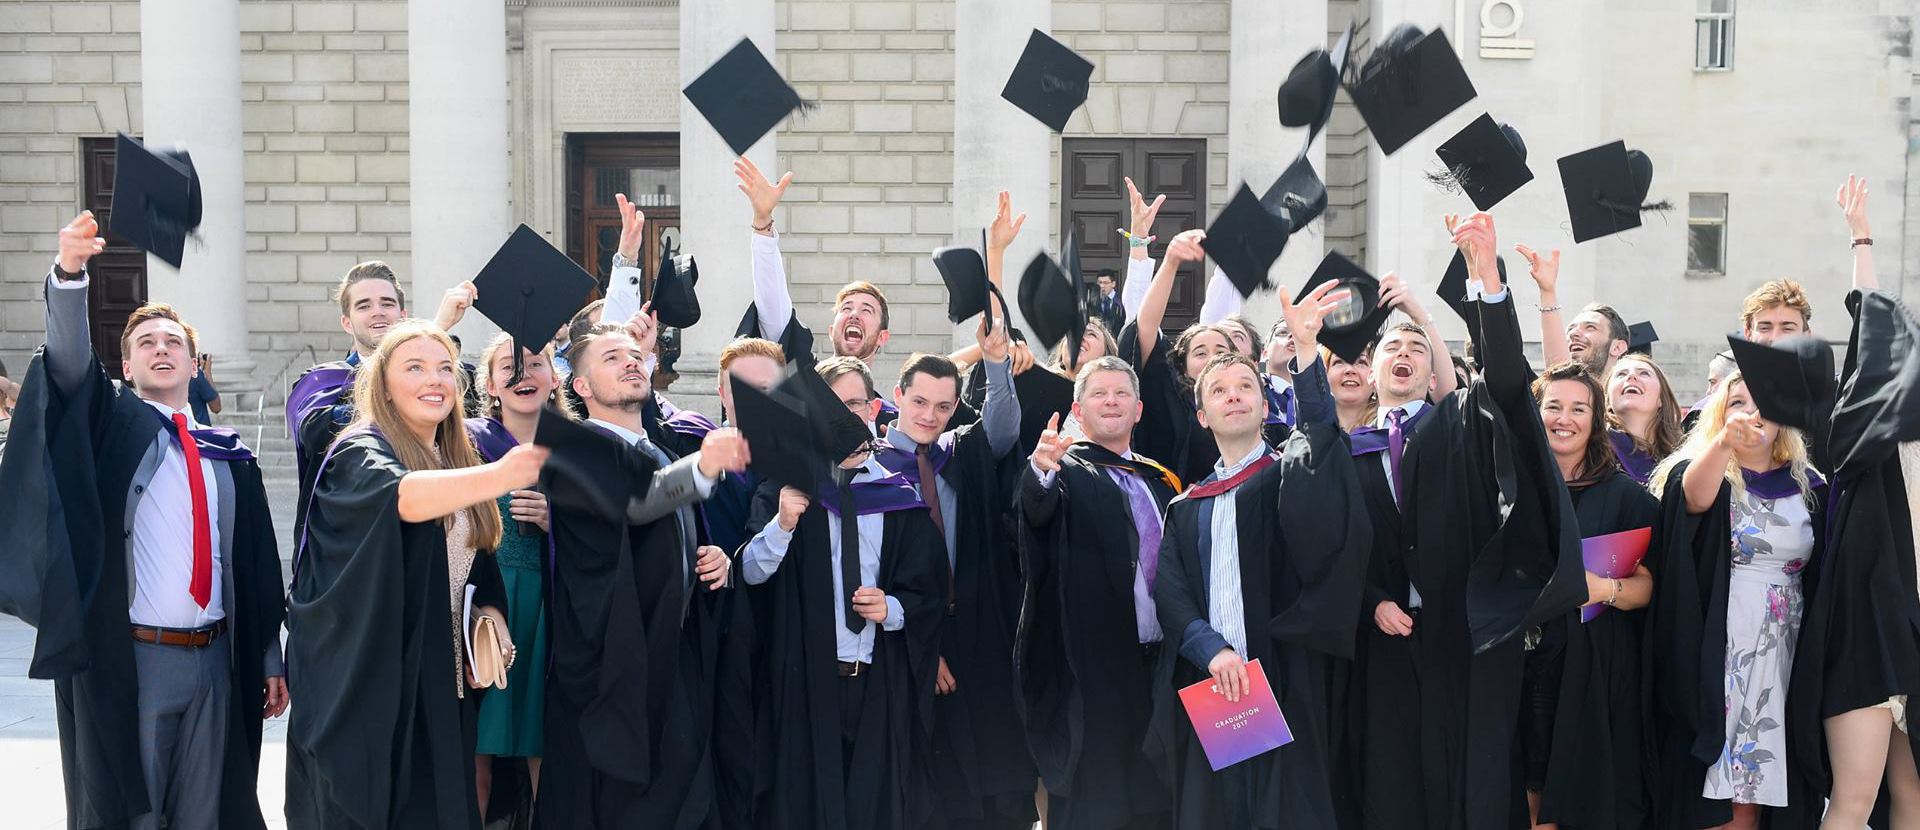 Solent graduates throwing hats in the air